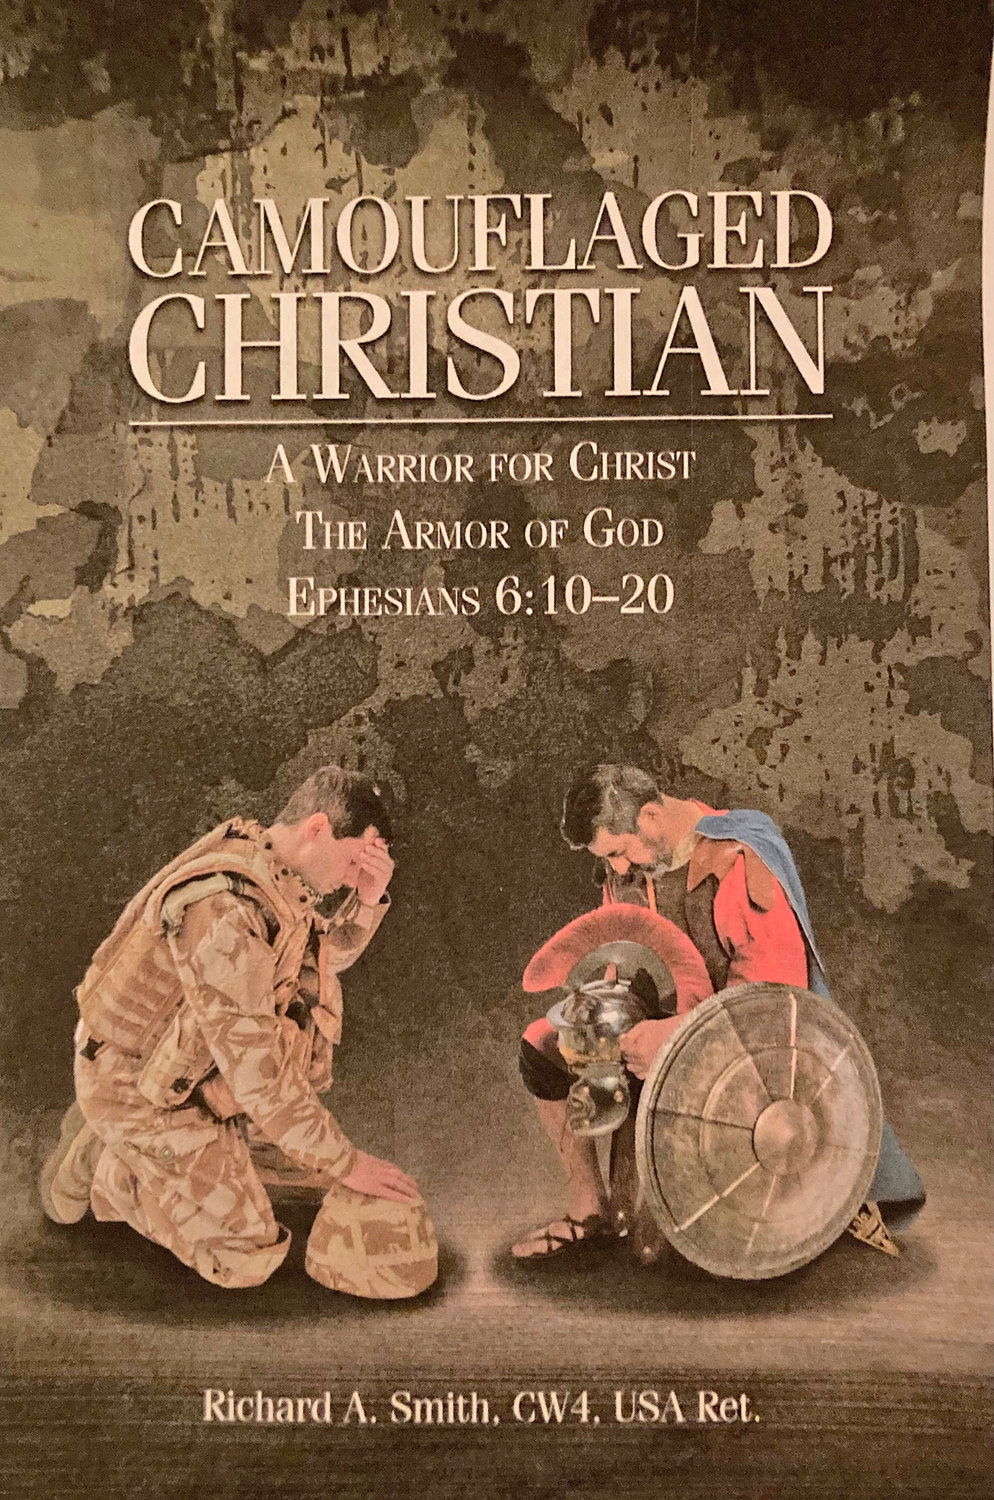 A local resident, Richard A. Smith, CW4 USA Retired, shares his spiritual journey as a soldier in his new book, “Camouflaged Christian: A Warrior for Christ: The Armor of God Ephesians 6:10-20.”